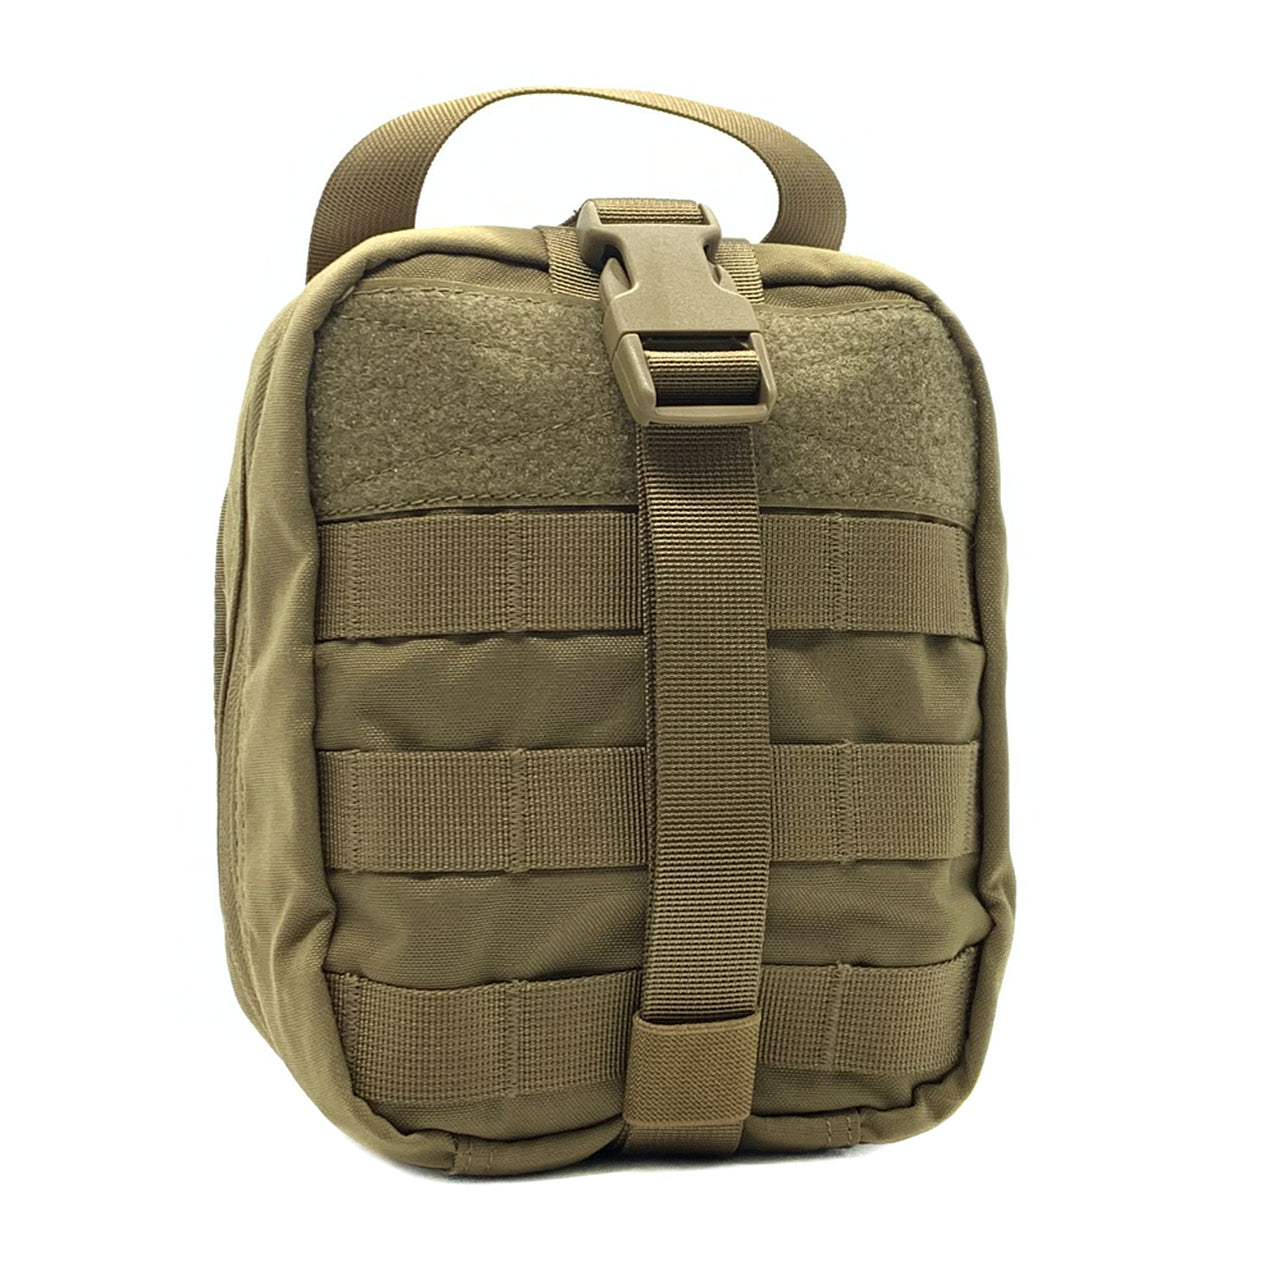 Shellback Tactical Rip Away Medic Pouch by Shellback Tactical.